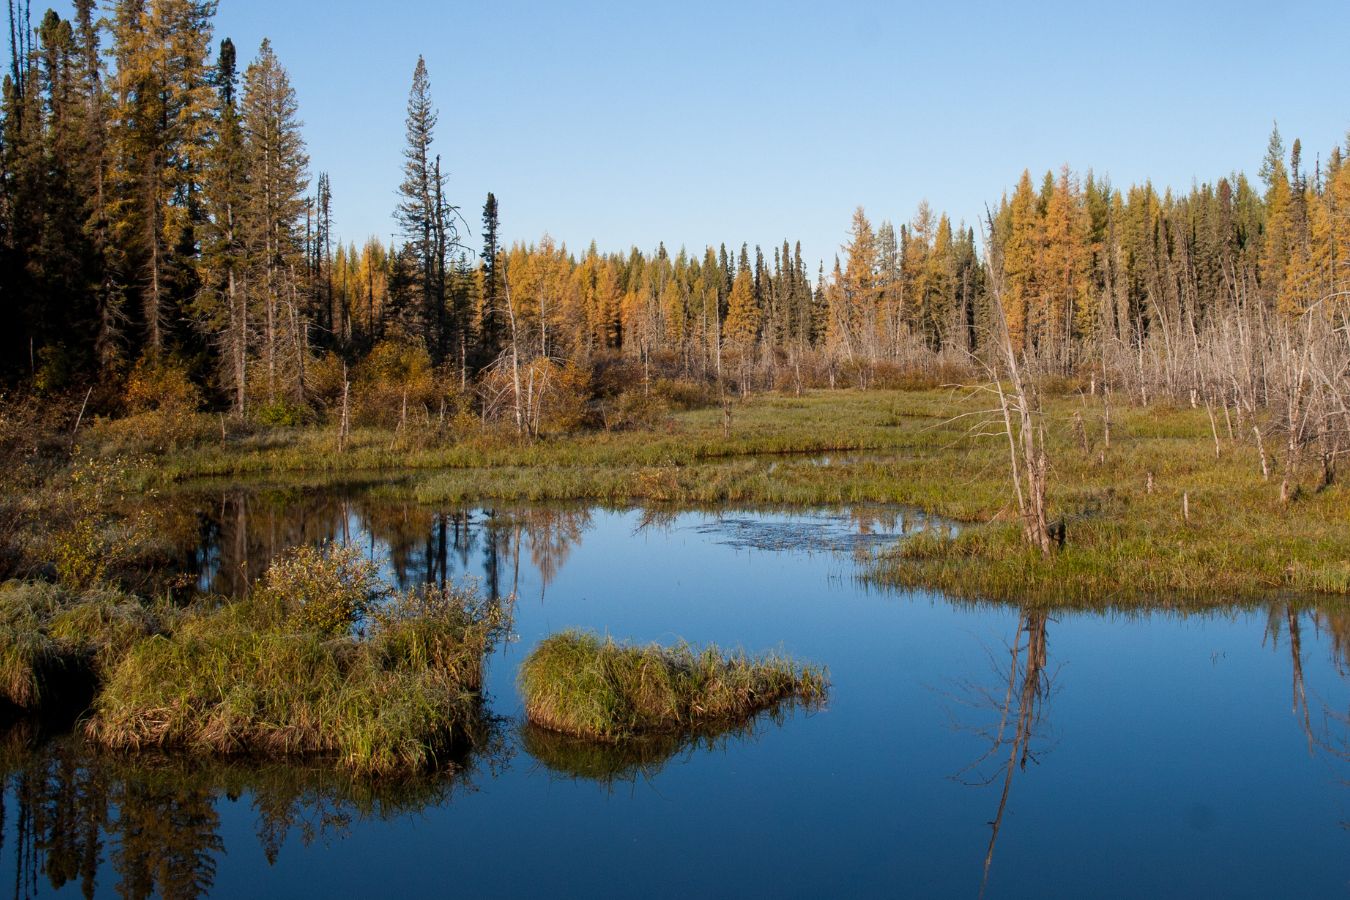 The boreal forest